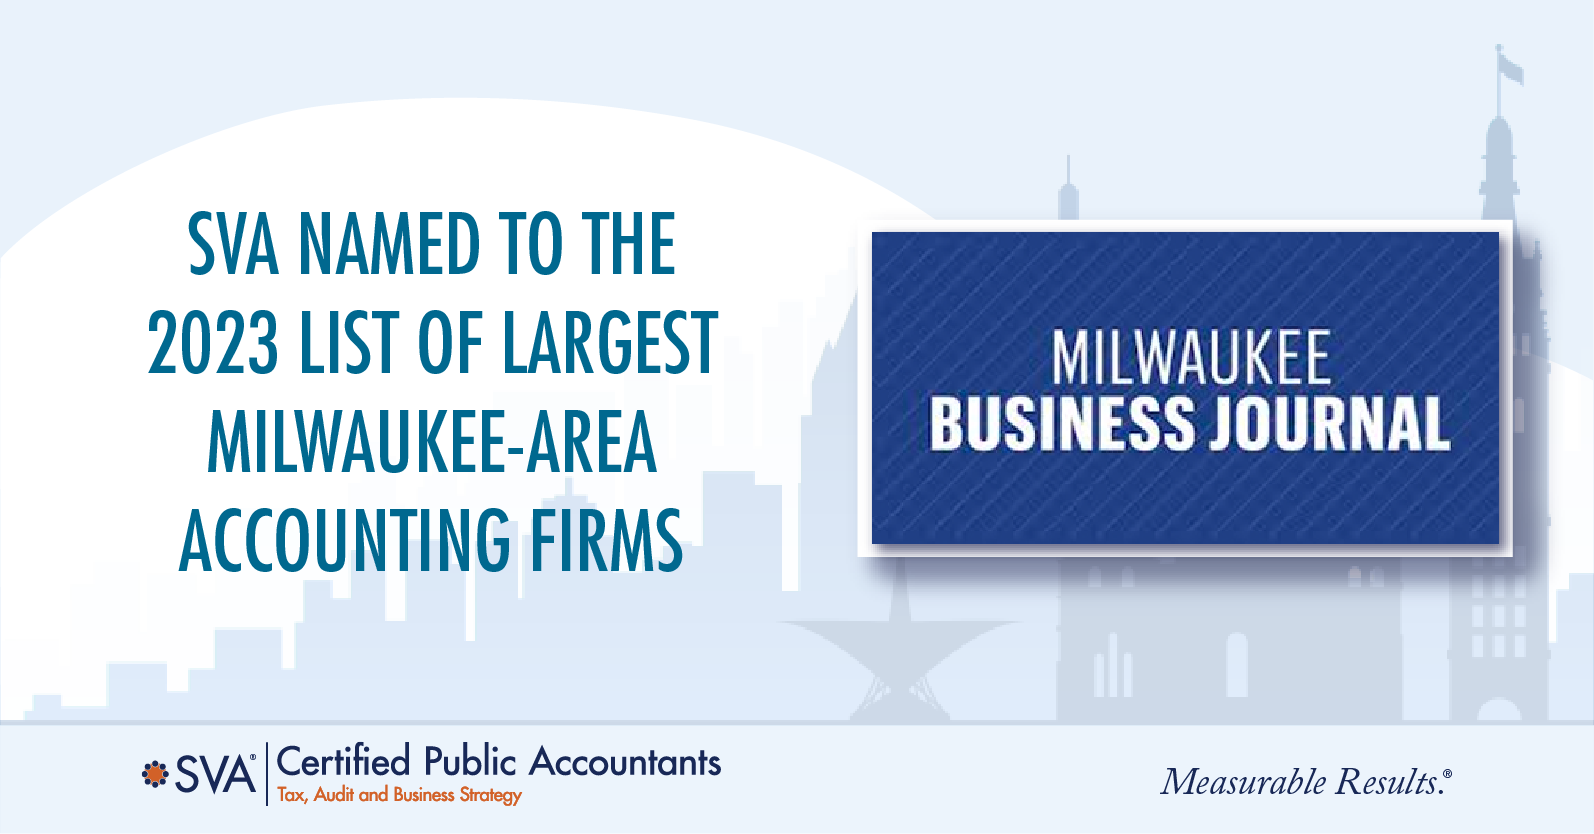 SVA Named to the 2023 List of Largest Milwaukee-Area Accounting Firms 